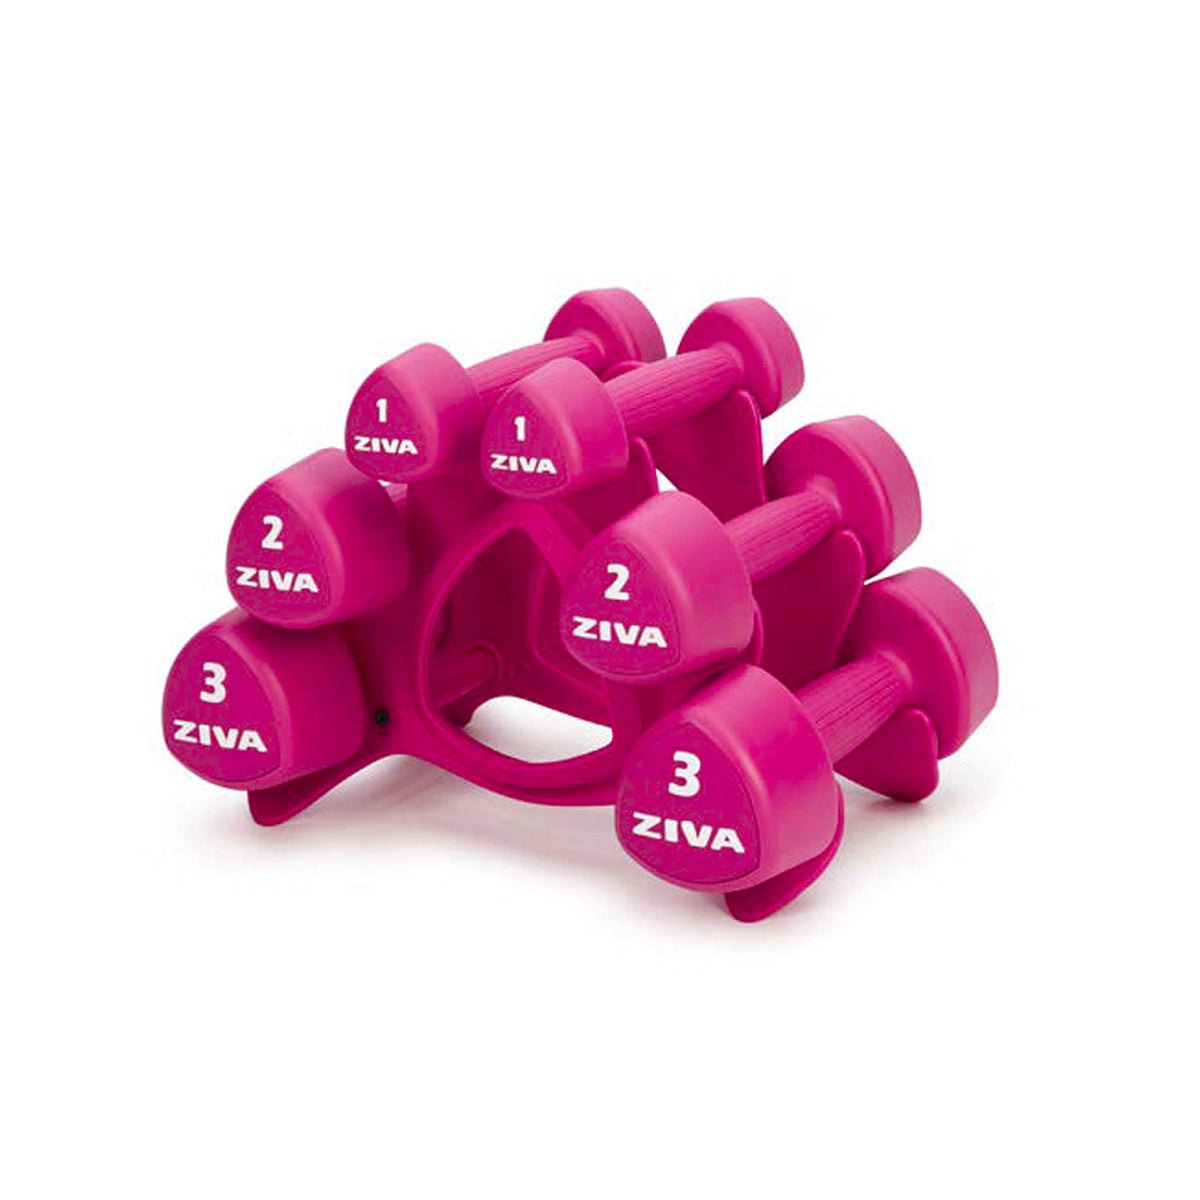 12 kg Dumbbell Set with Stand (Pink) - ZIVA Chic (Pairs 1, 2 and 3 kg)